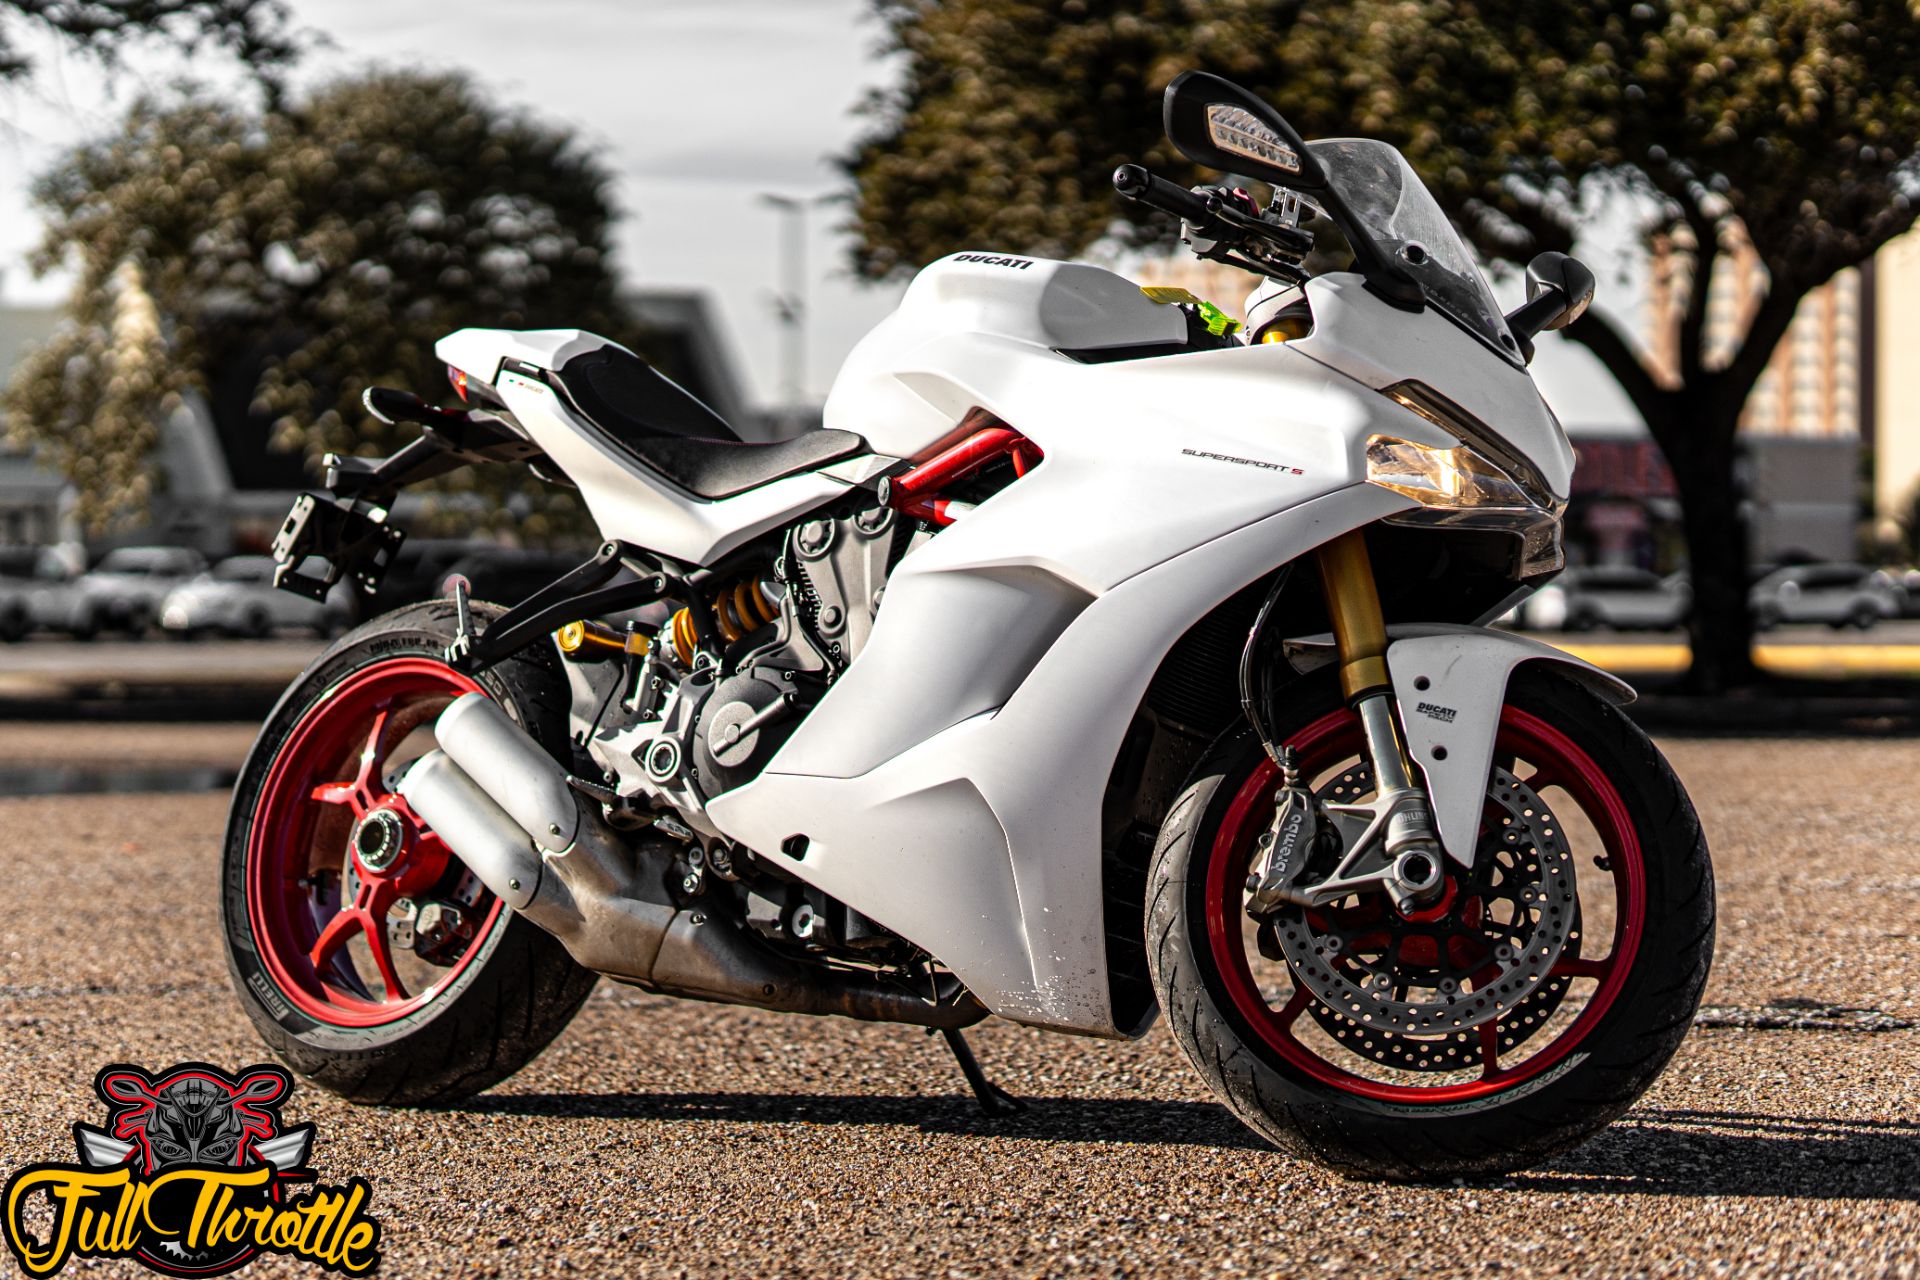 2018 Ducati SuperSport S in Houston, Texas - Photo 1